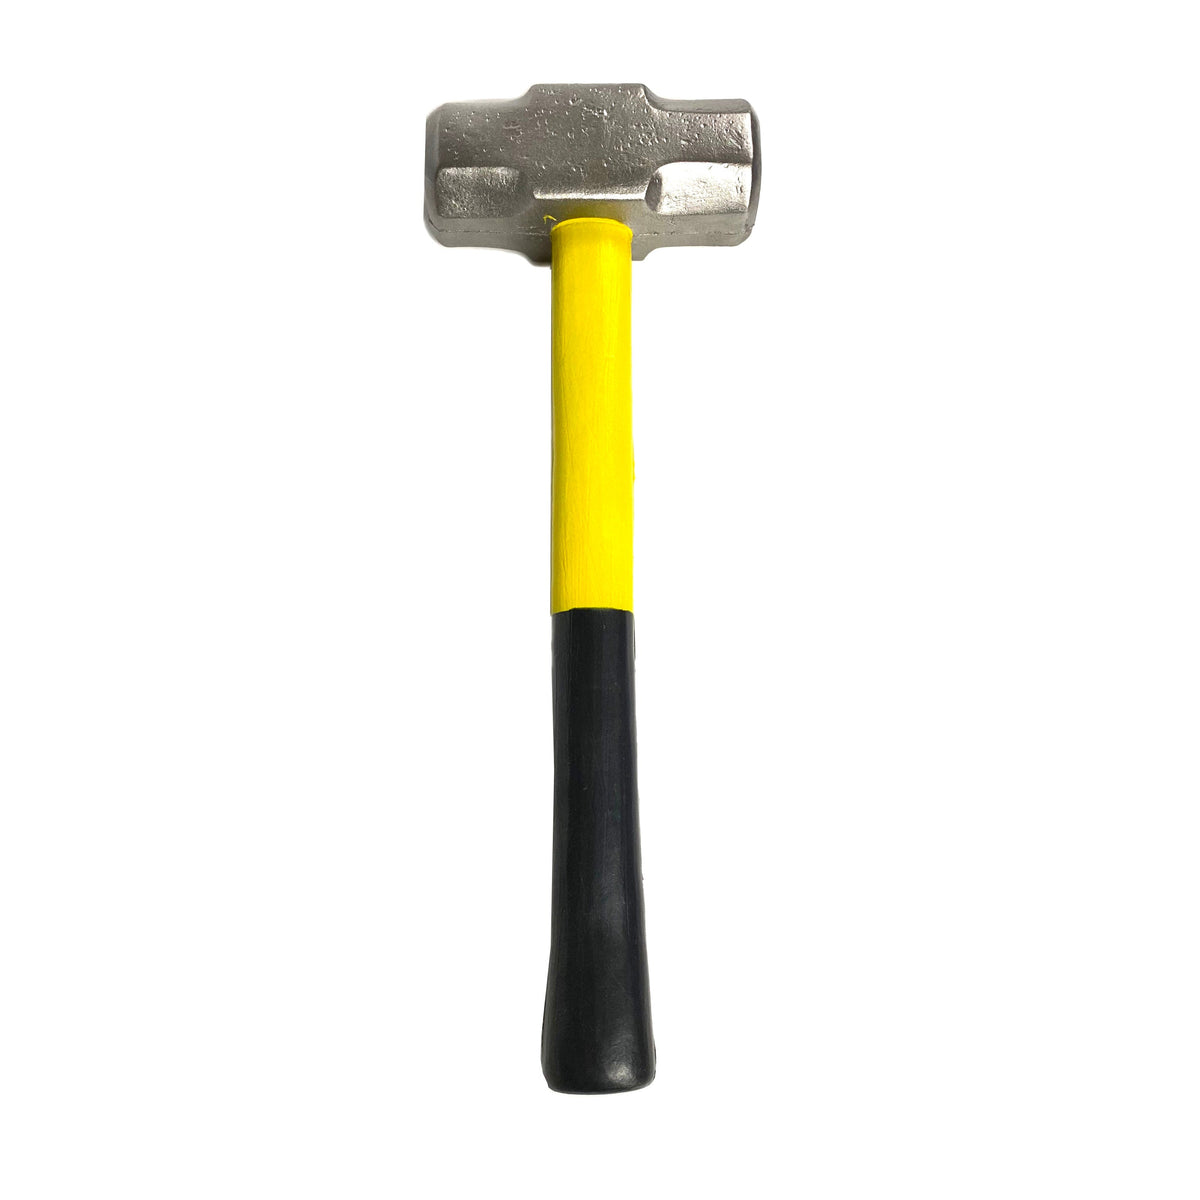 Foam Rubber Roughneck Mini Sledgehammer Prop 16 Inch  - Black and Yellow